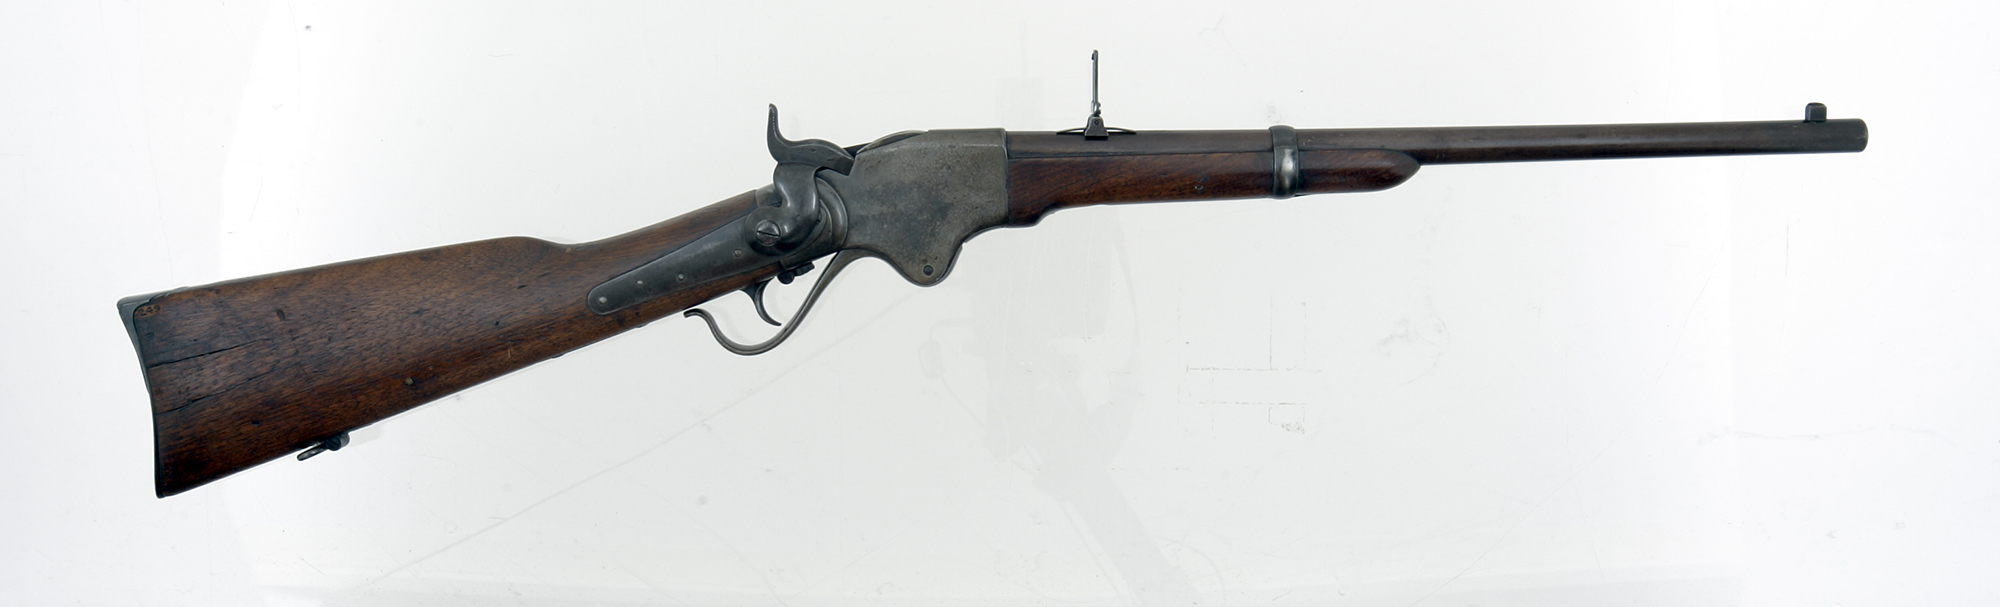 Frederic Remington’s Spencer Repeating Carbine